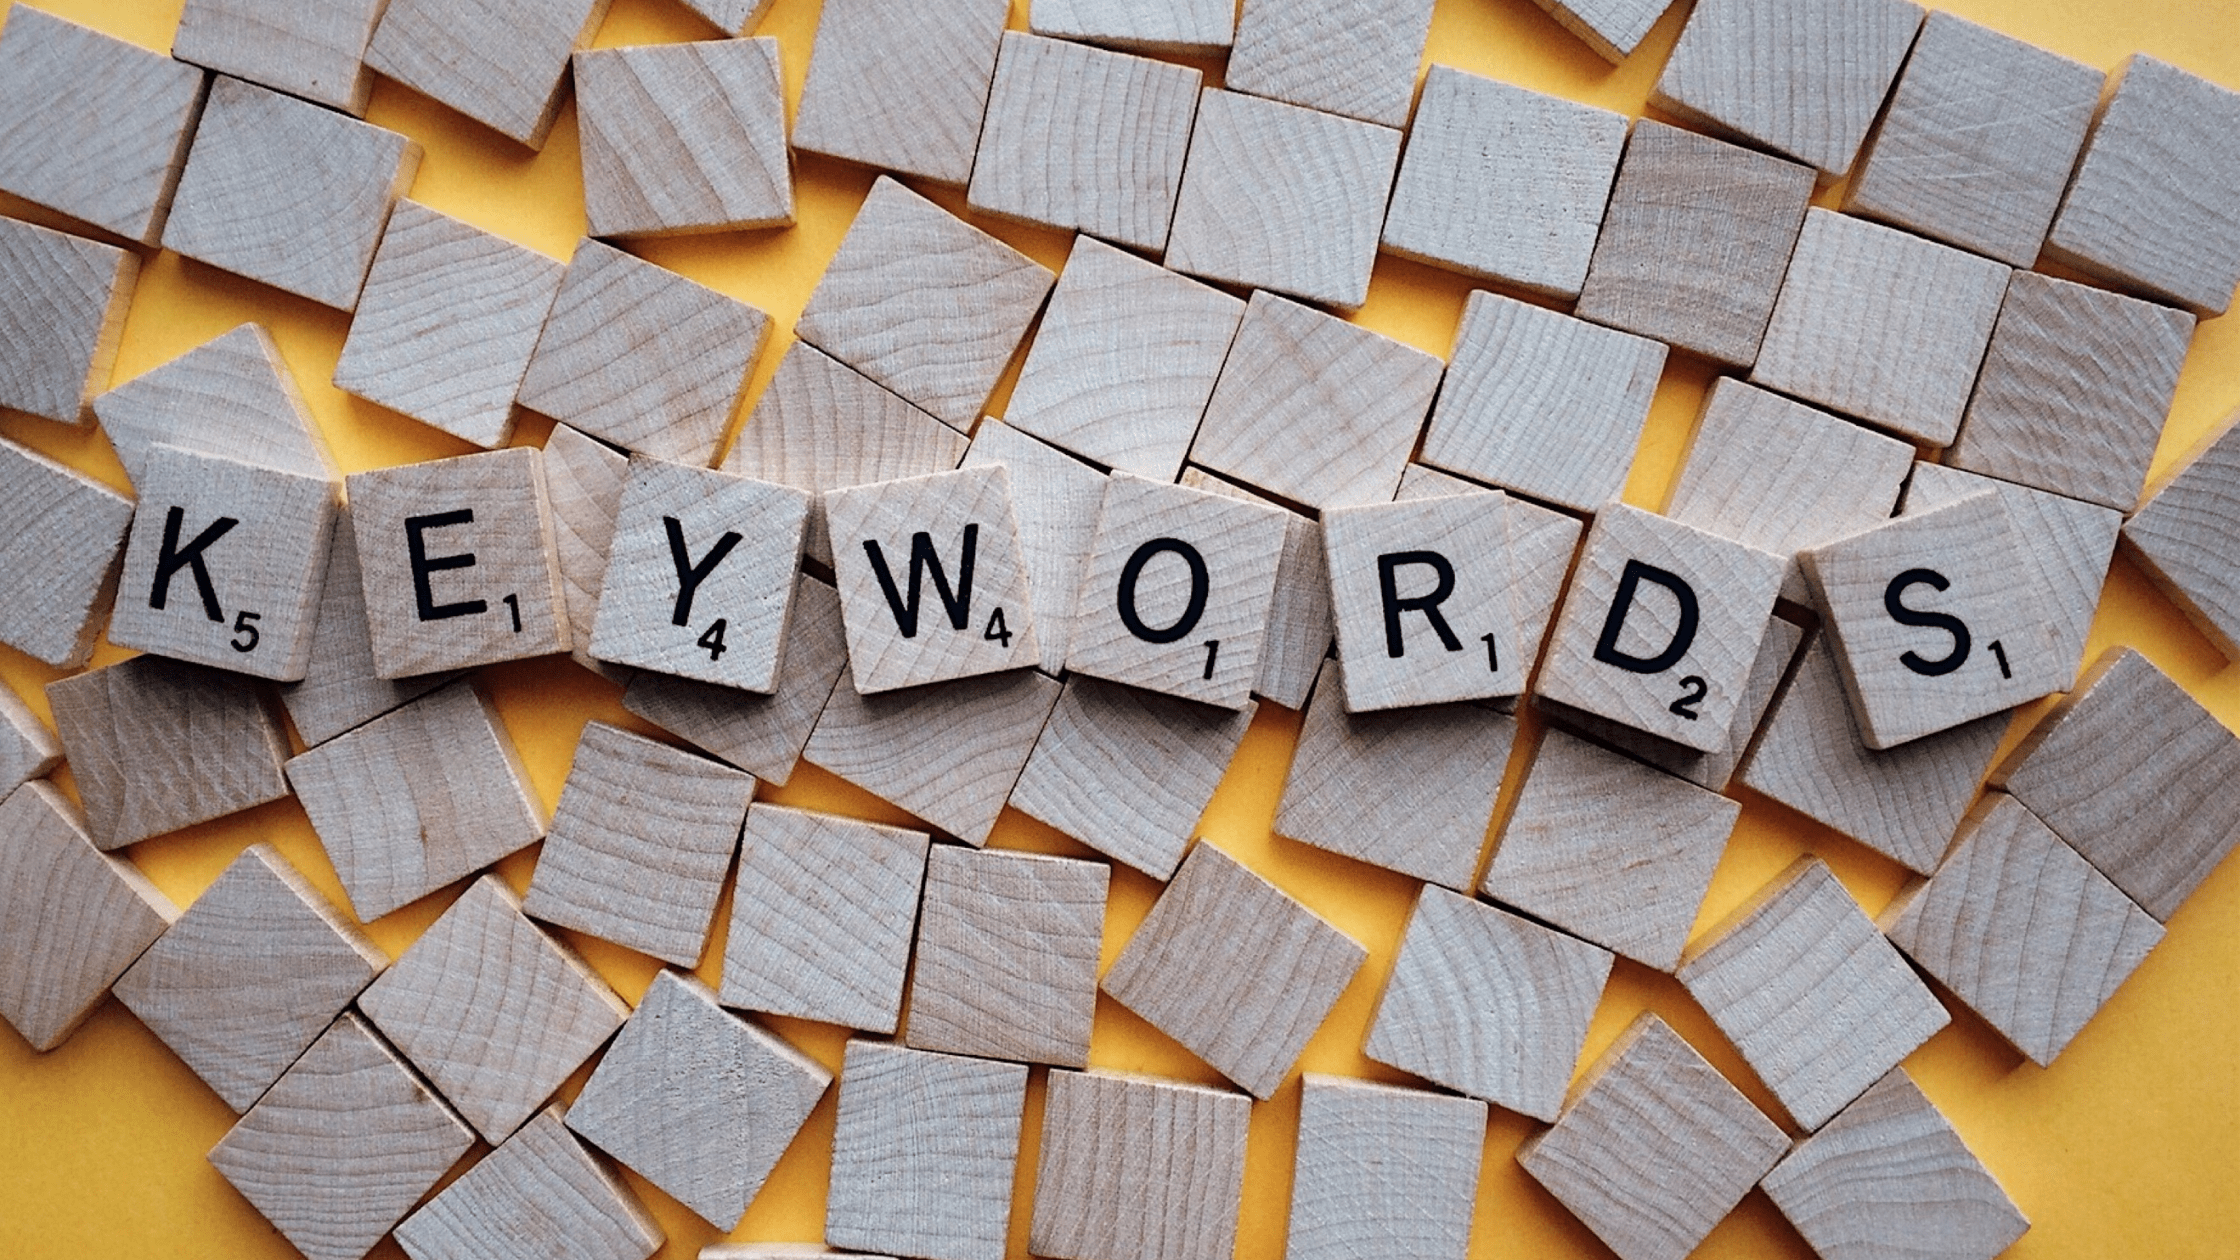 Why Keyword Research is So Important